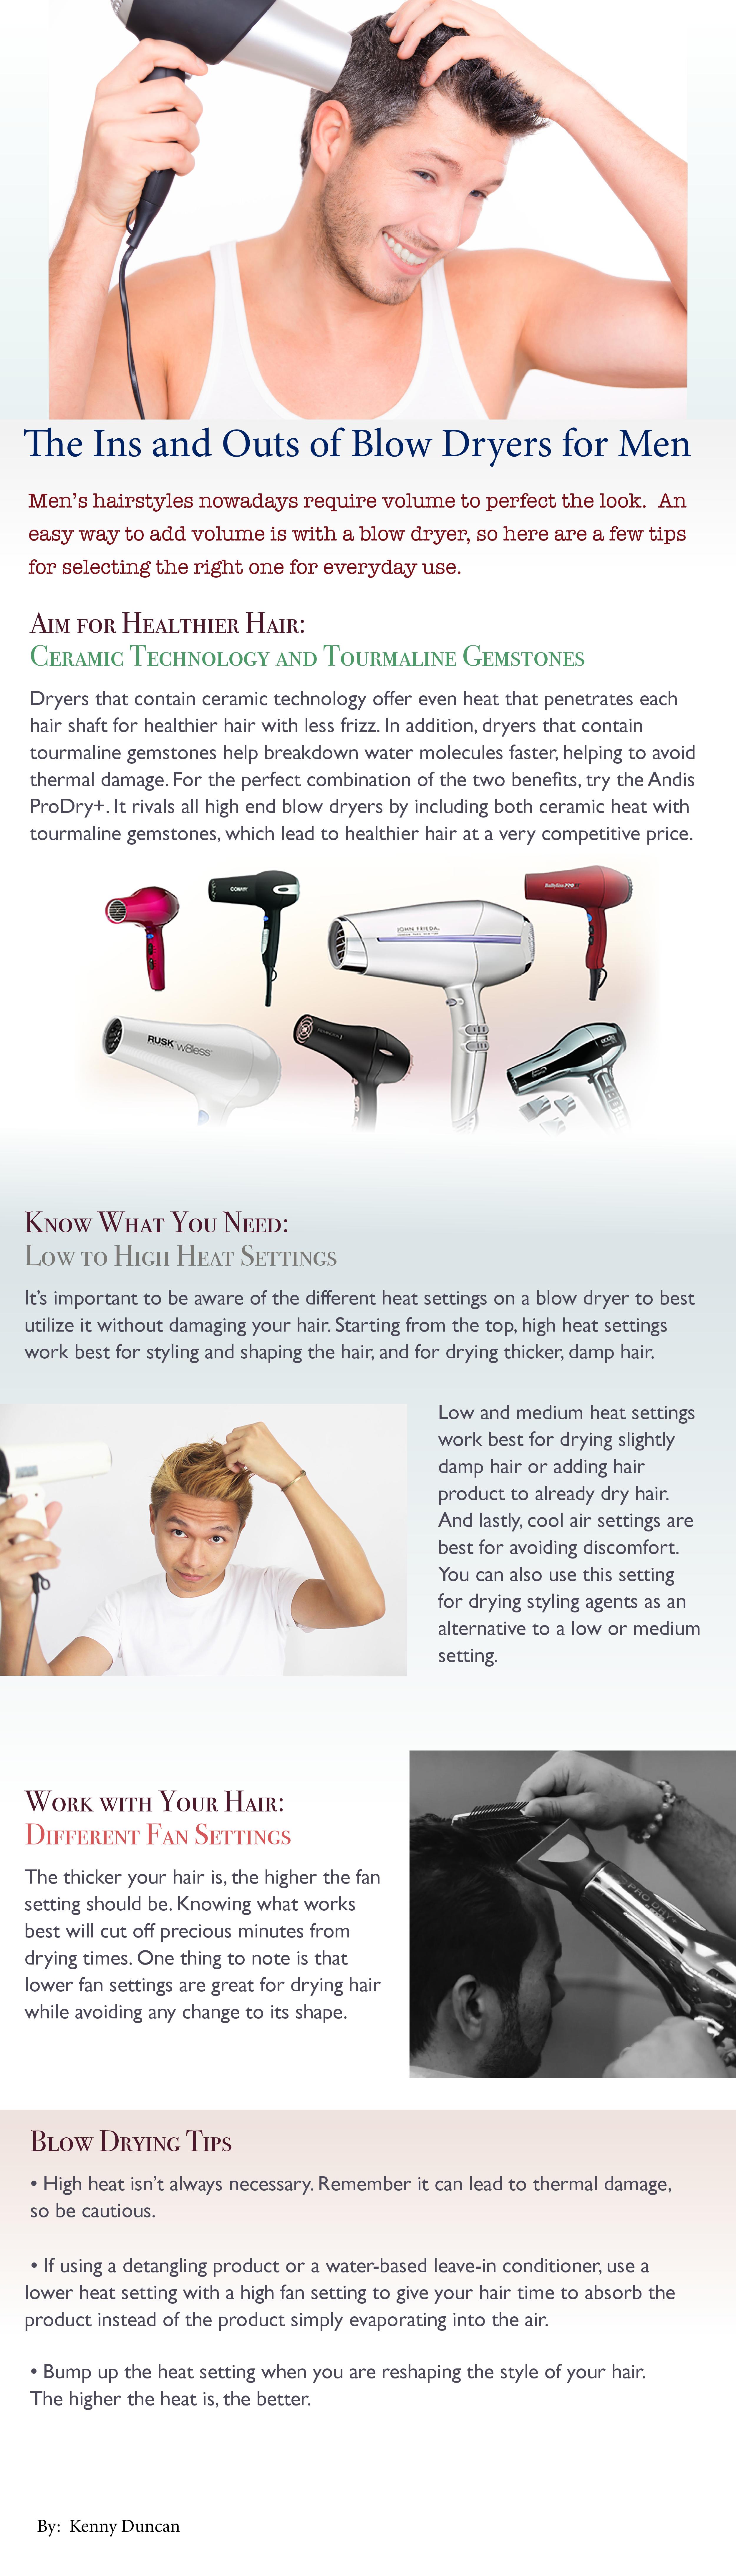 Ins and Outs of Blow Dryers - Kenny Duncan-page-001